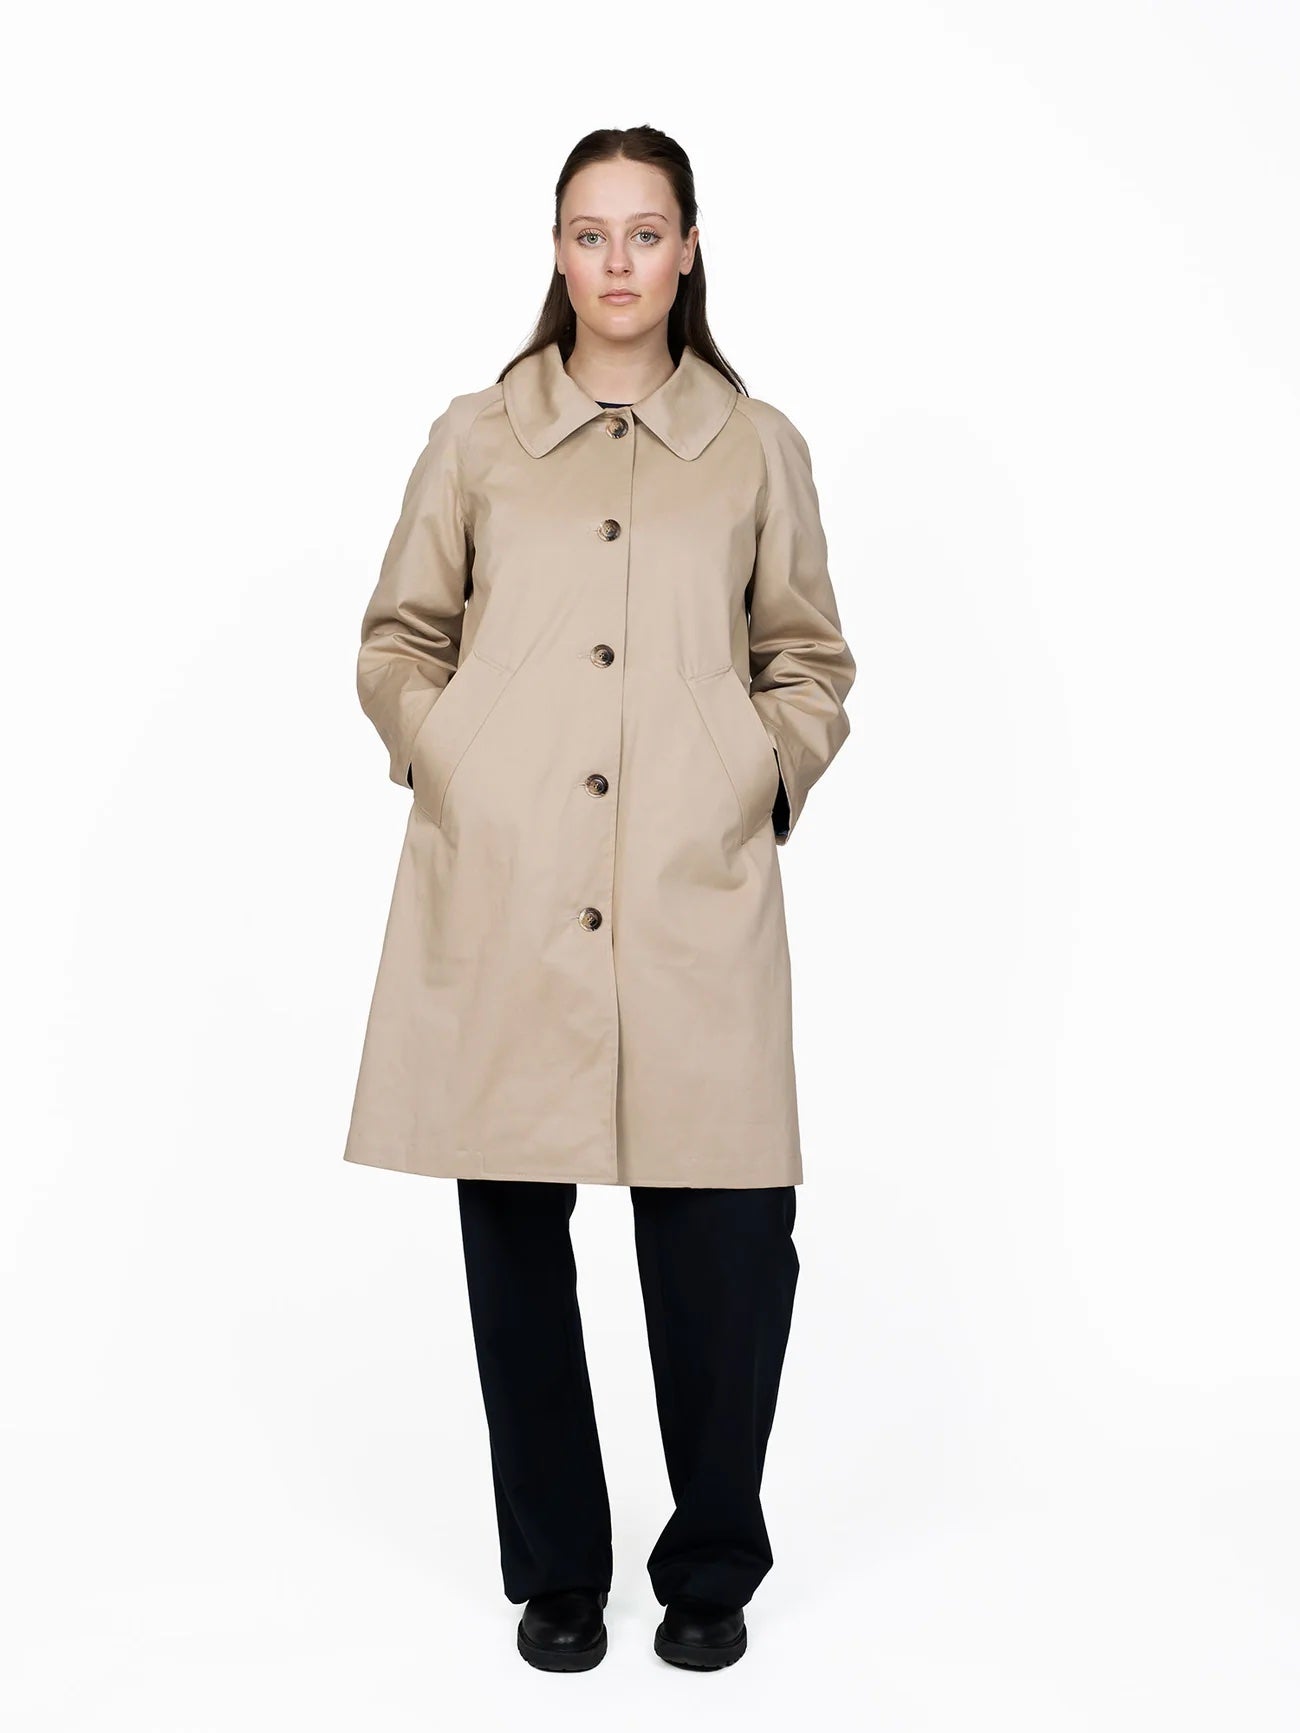 Woman wearing the Car Coat sewing pattern from The Assembly Line on The Fold Line. A coat pattern made in medium weight fabrics, featuring a slight A-line silhouette, relaxed fit, raglan sleeves, front welt pockets, with or without lining, front button cl